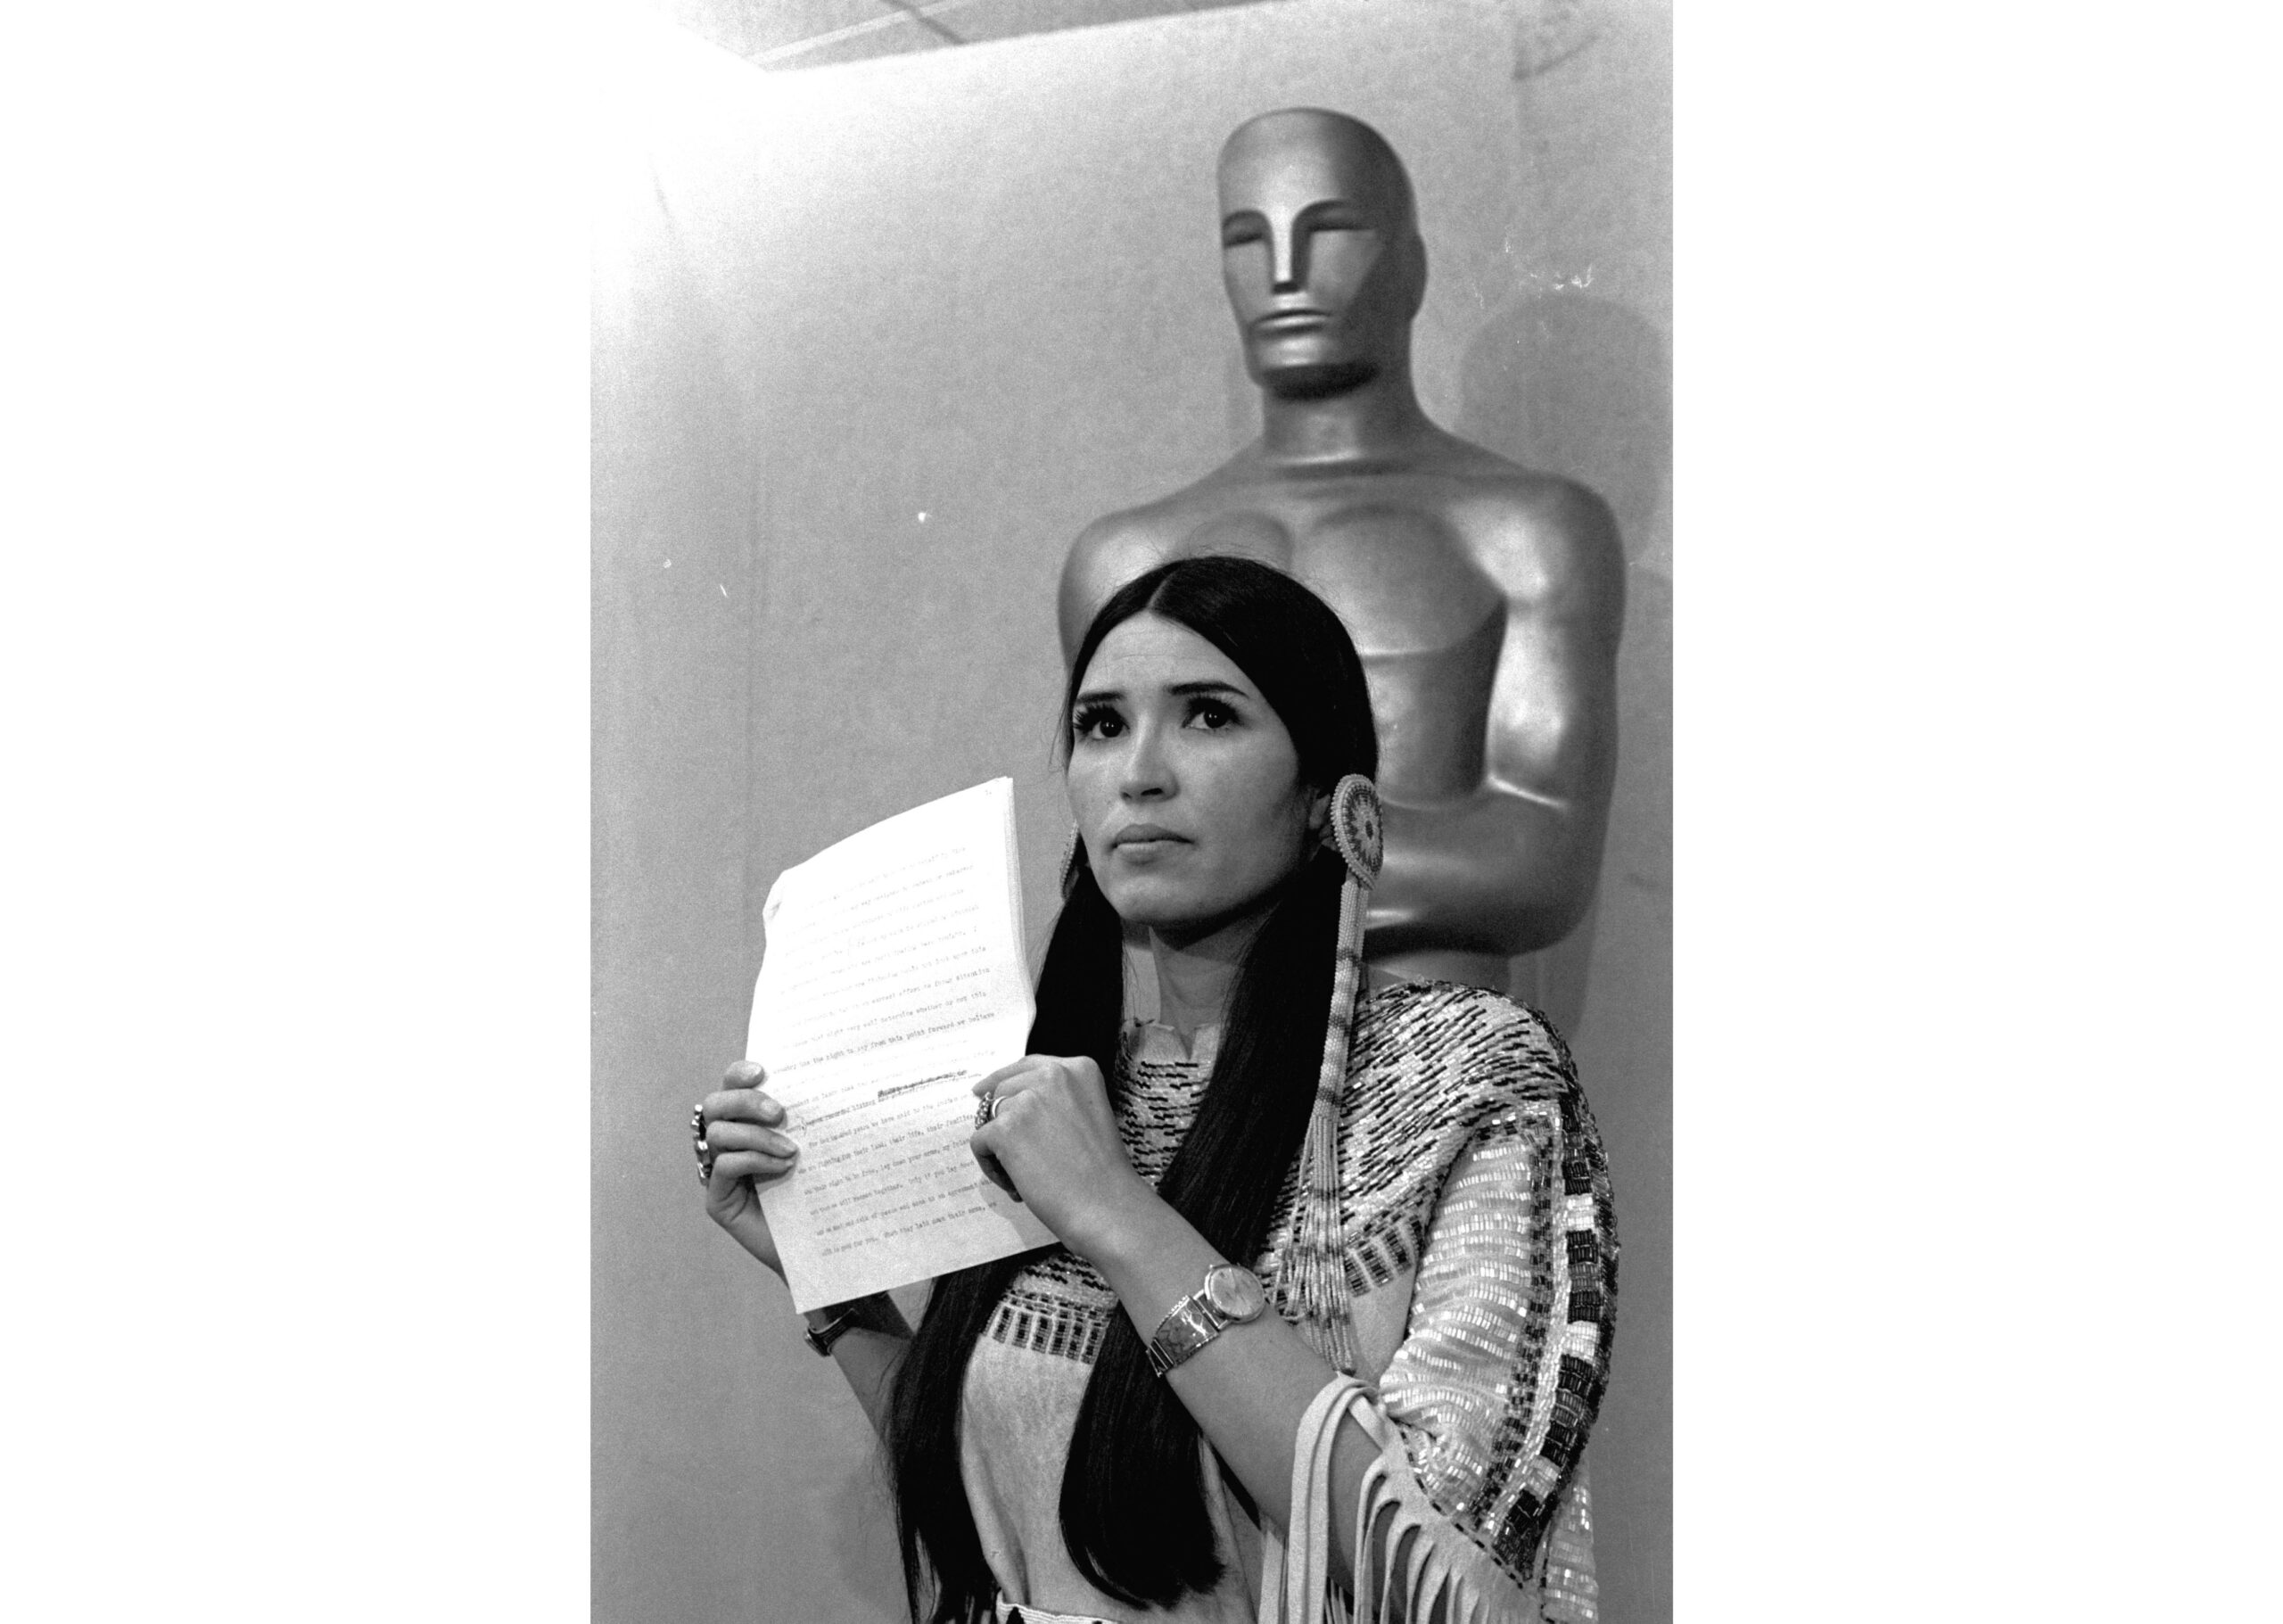 FILE - Sacheen Littlefeather appears at the Academy Awards ceremony to announce that Marlon Brando was declining his Oscar as best actor for his role in "The Godfather," on March 27, 1973. The move was meant to protest Hollywood's treatment of American Indians. Nearly 50 years later, the Academy of Motion Pictures Arts and Sciences has apologized to Littlefeather for the abuse she endured. The Academy Museum of Motion Pictures on Monday said that it will host Littlefeather, now 75, for an evening of “conversation, healing and celebration” on Sept. 17. (AP Photo, File)